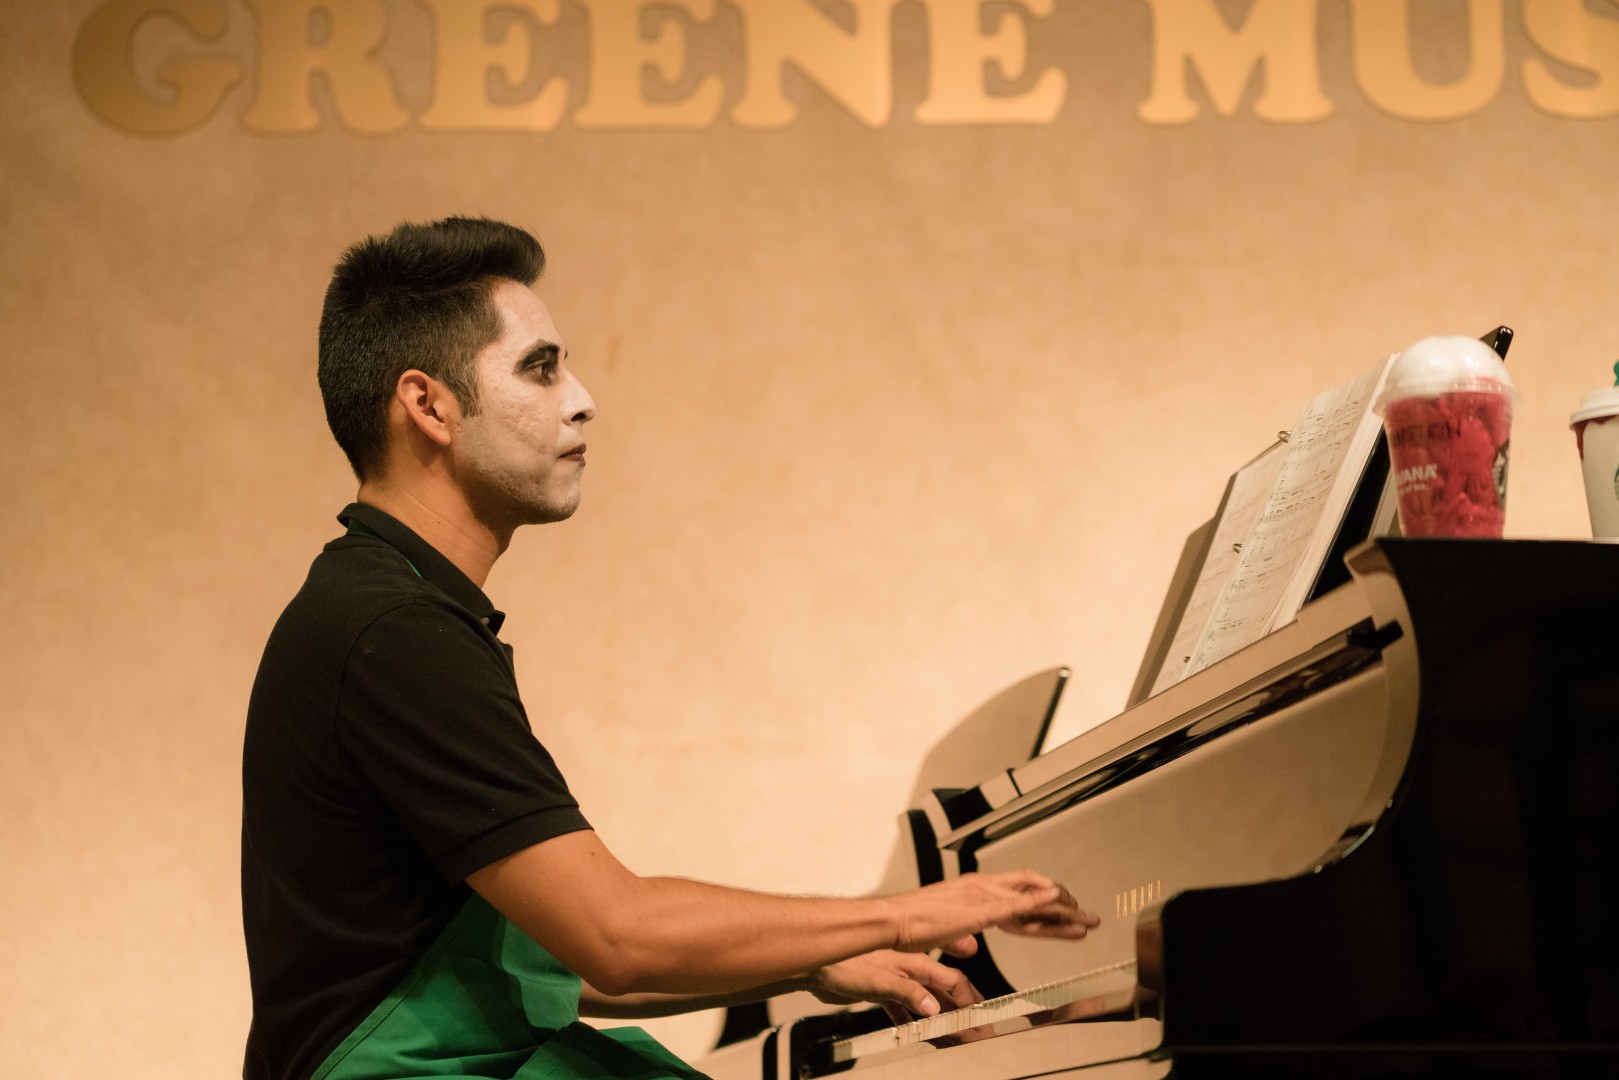 A young man with makeup playing the piano